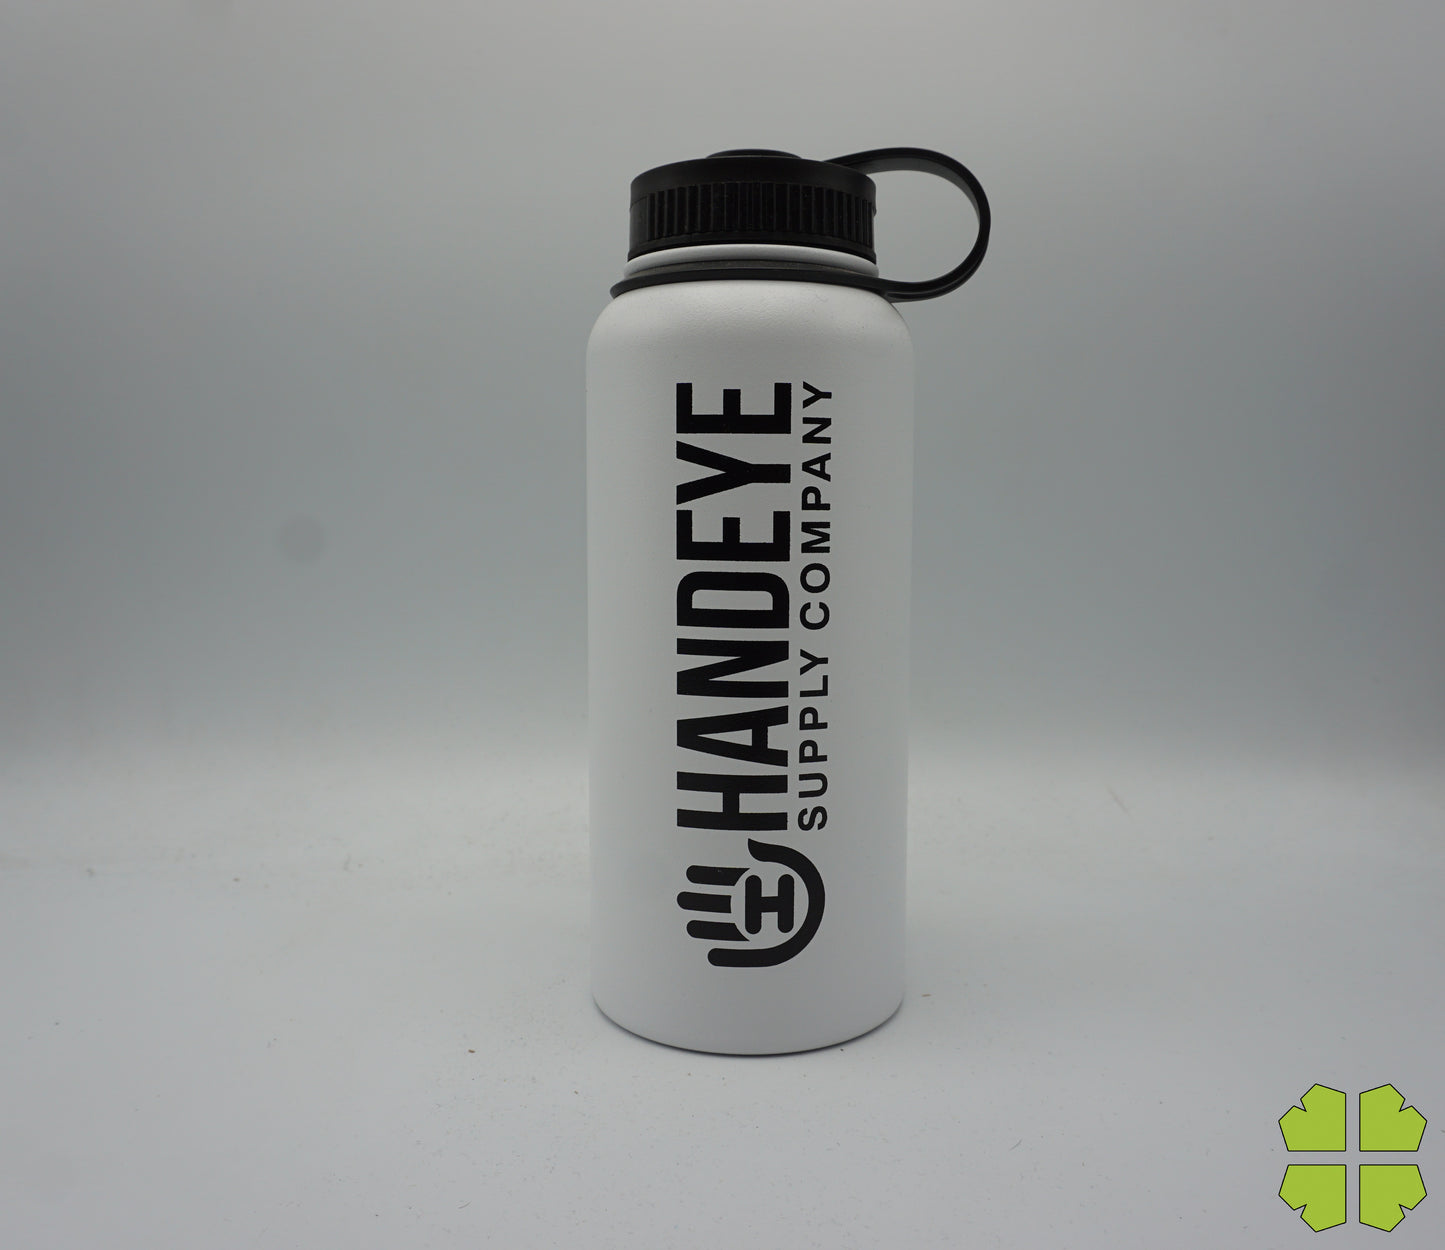 32 oz Stainless Steel Canteen Water Bottle. BUY 1 GET 1 FREE!!!